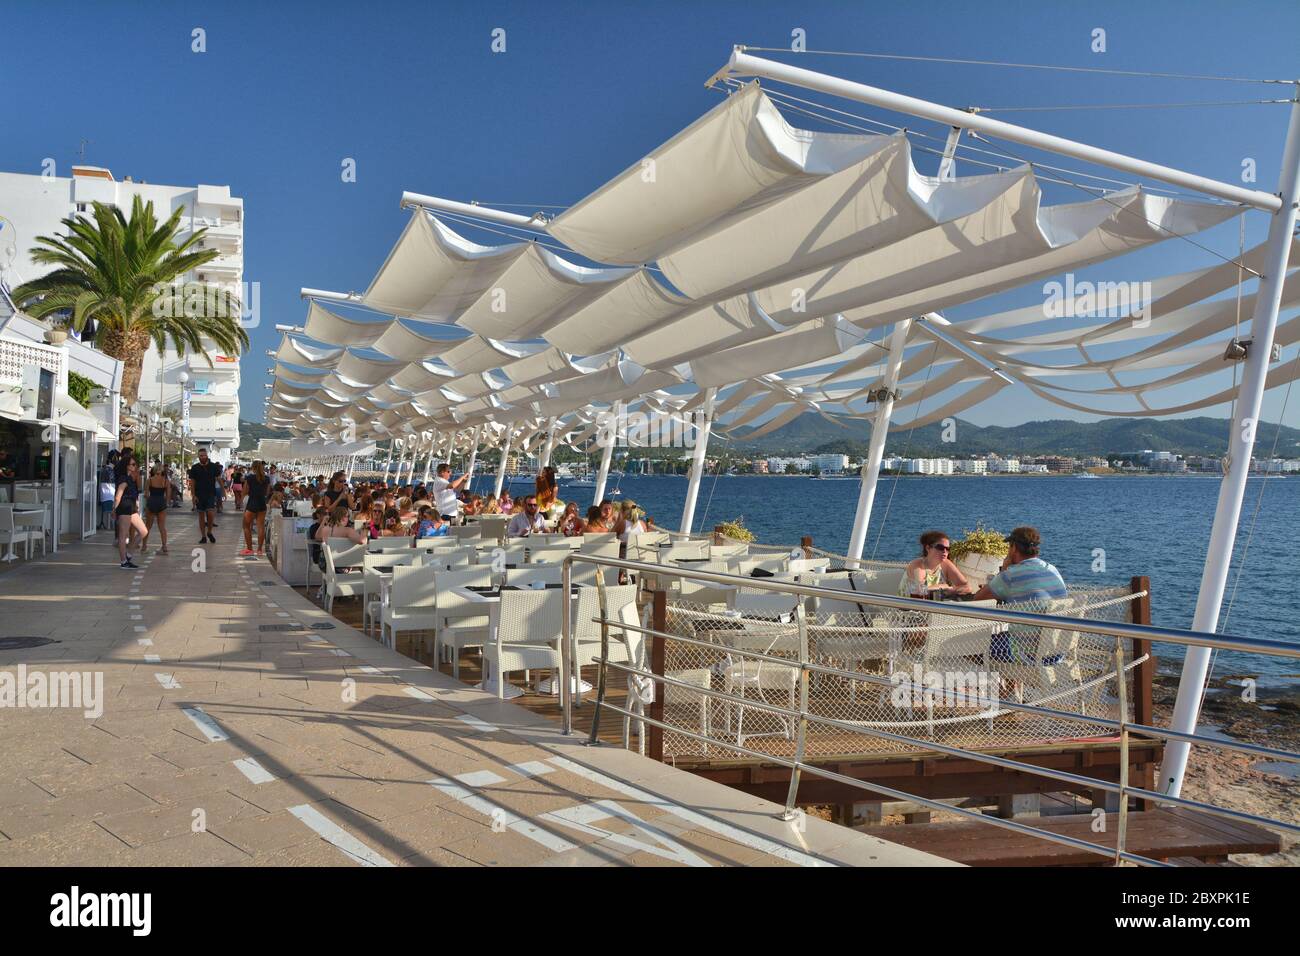 IBIZA, SPAIN - JULY 12, 2017: Cafe del Mar in San Antonio de Portmany on Ibiza island. It is a famous seaside bar with the best views of sunset with m Stock Photo